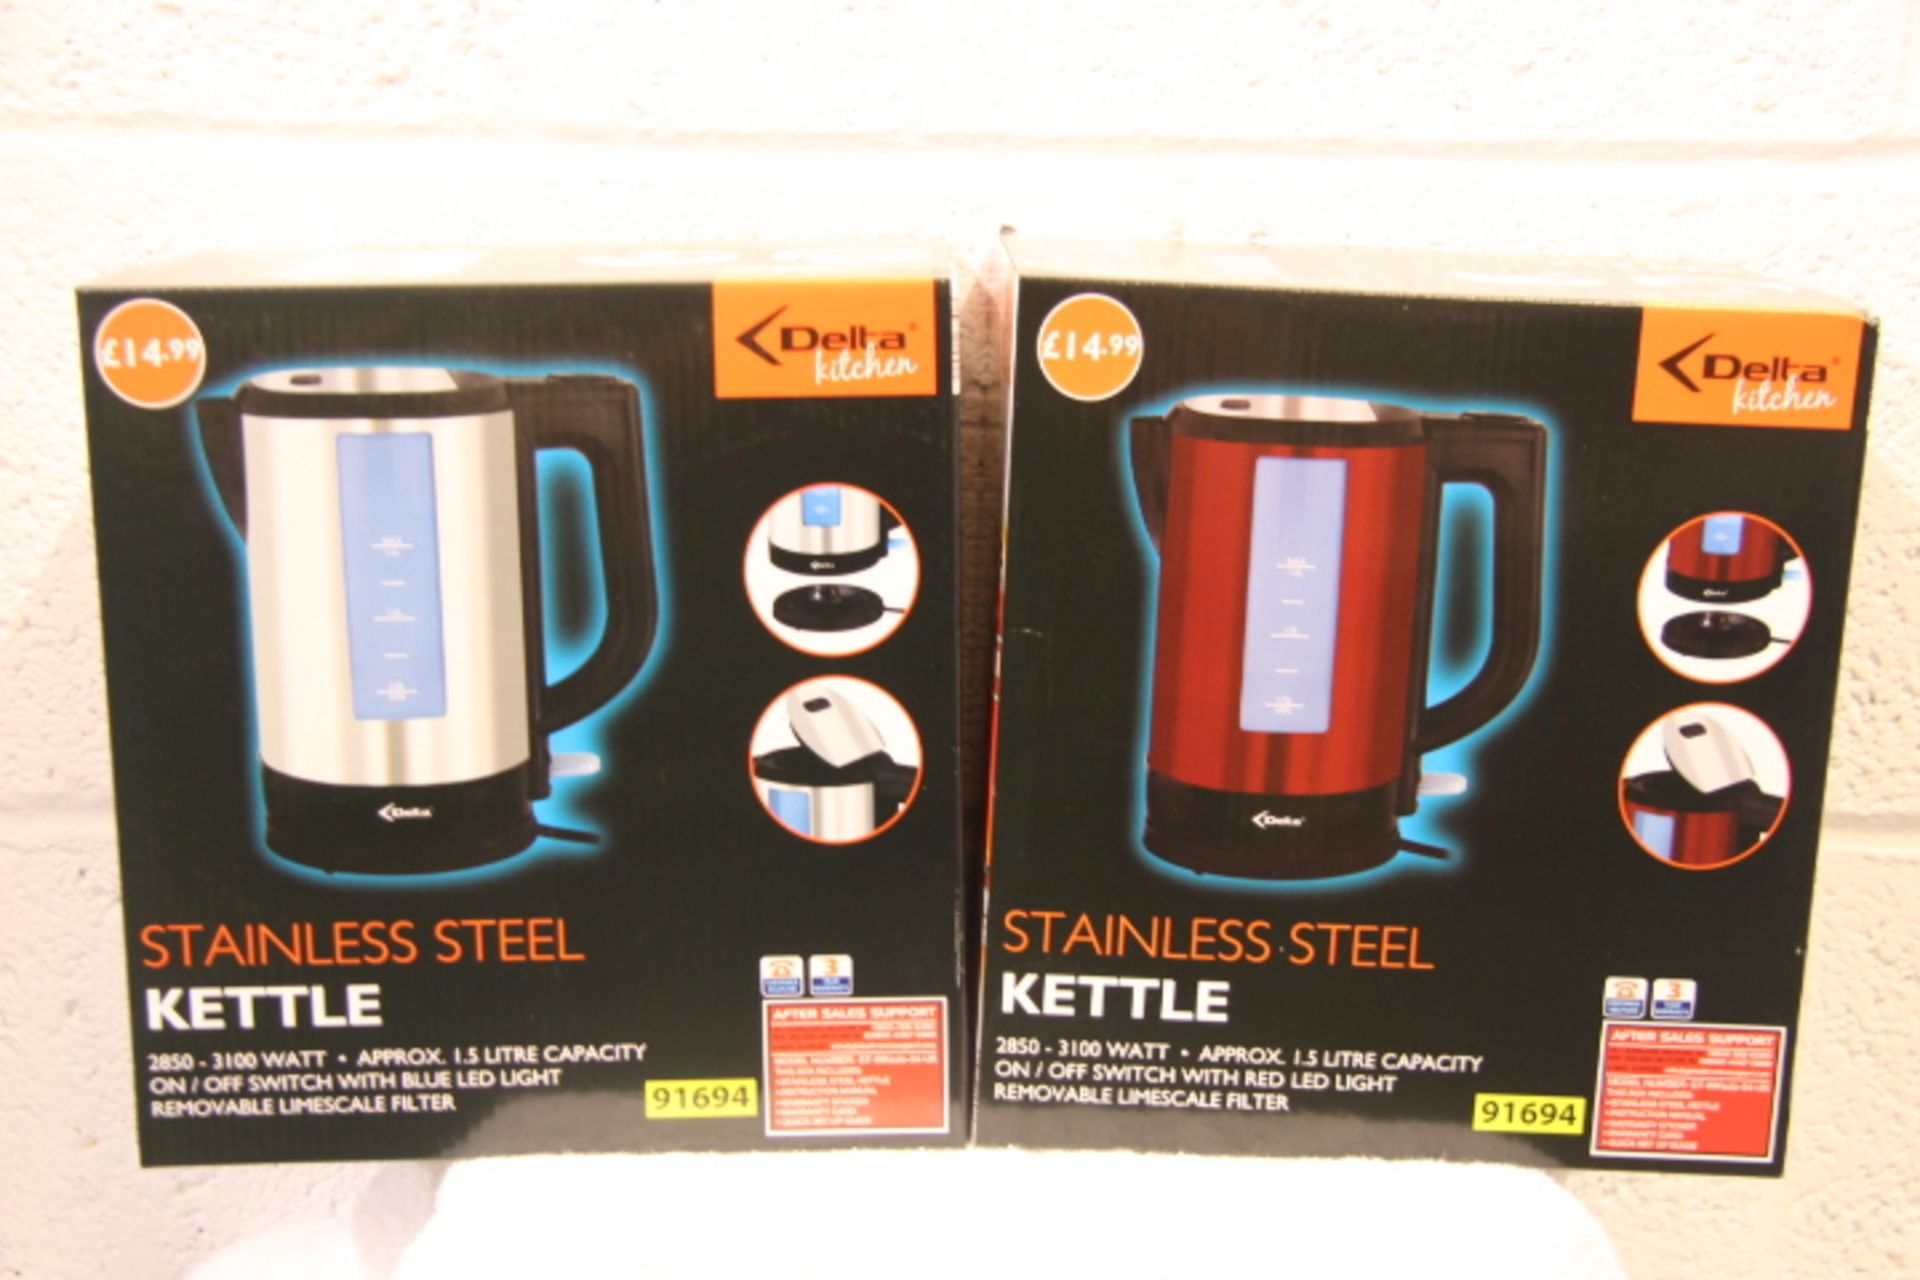 V *TRADE QTY* Brand New Delta Kitchen 2850-3100w 1.5 Litre Stainless Steel Kettle X 10 YOUR BID